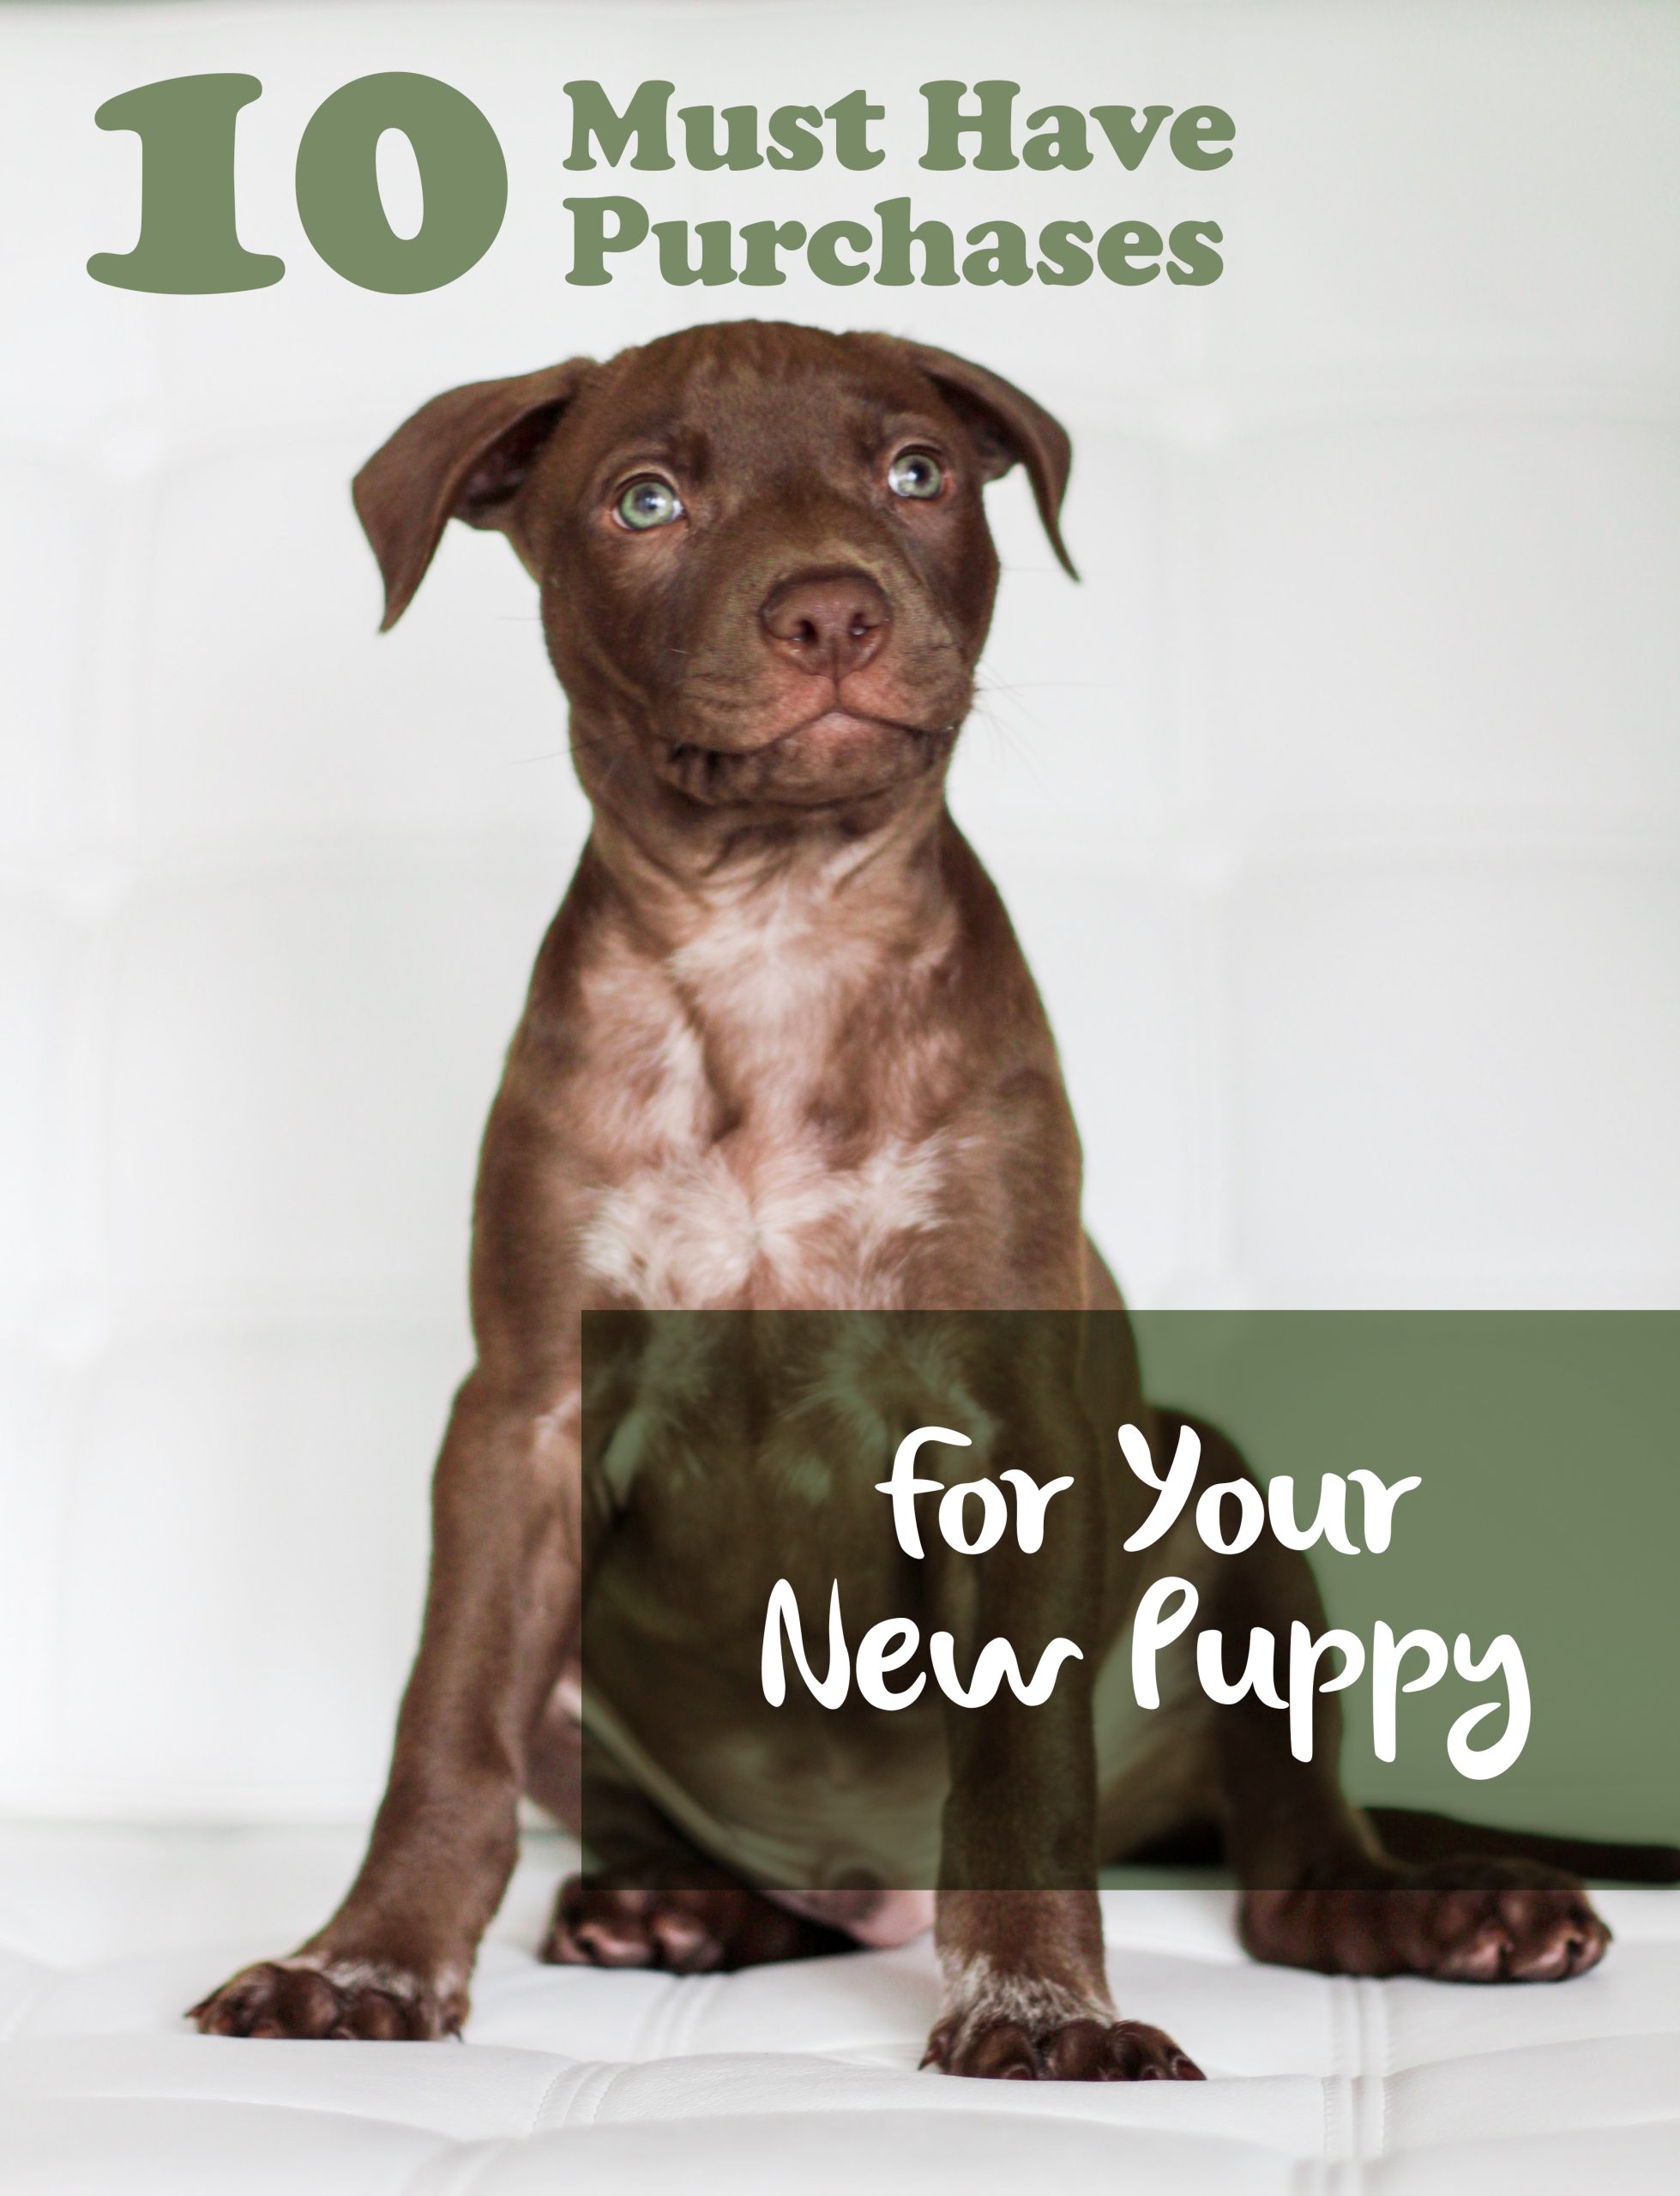 10 Must Have Purchases For Your New Puppy | New Puppy Checklist | Puppy Starter Kit Tips | New Dog Checklist | New Puppy Tips, what you need when you get a puppy | puppy necessities | new puppy purchases | what to buy before you get a new puppy